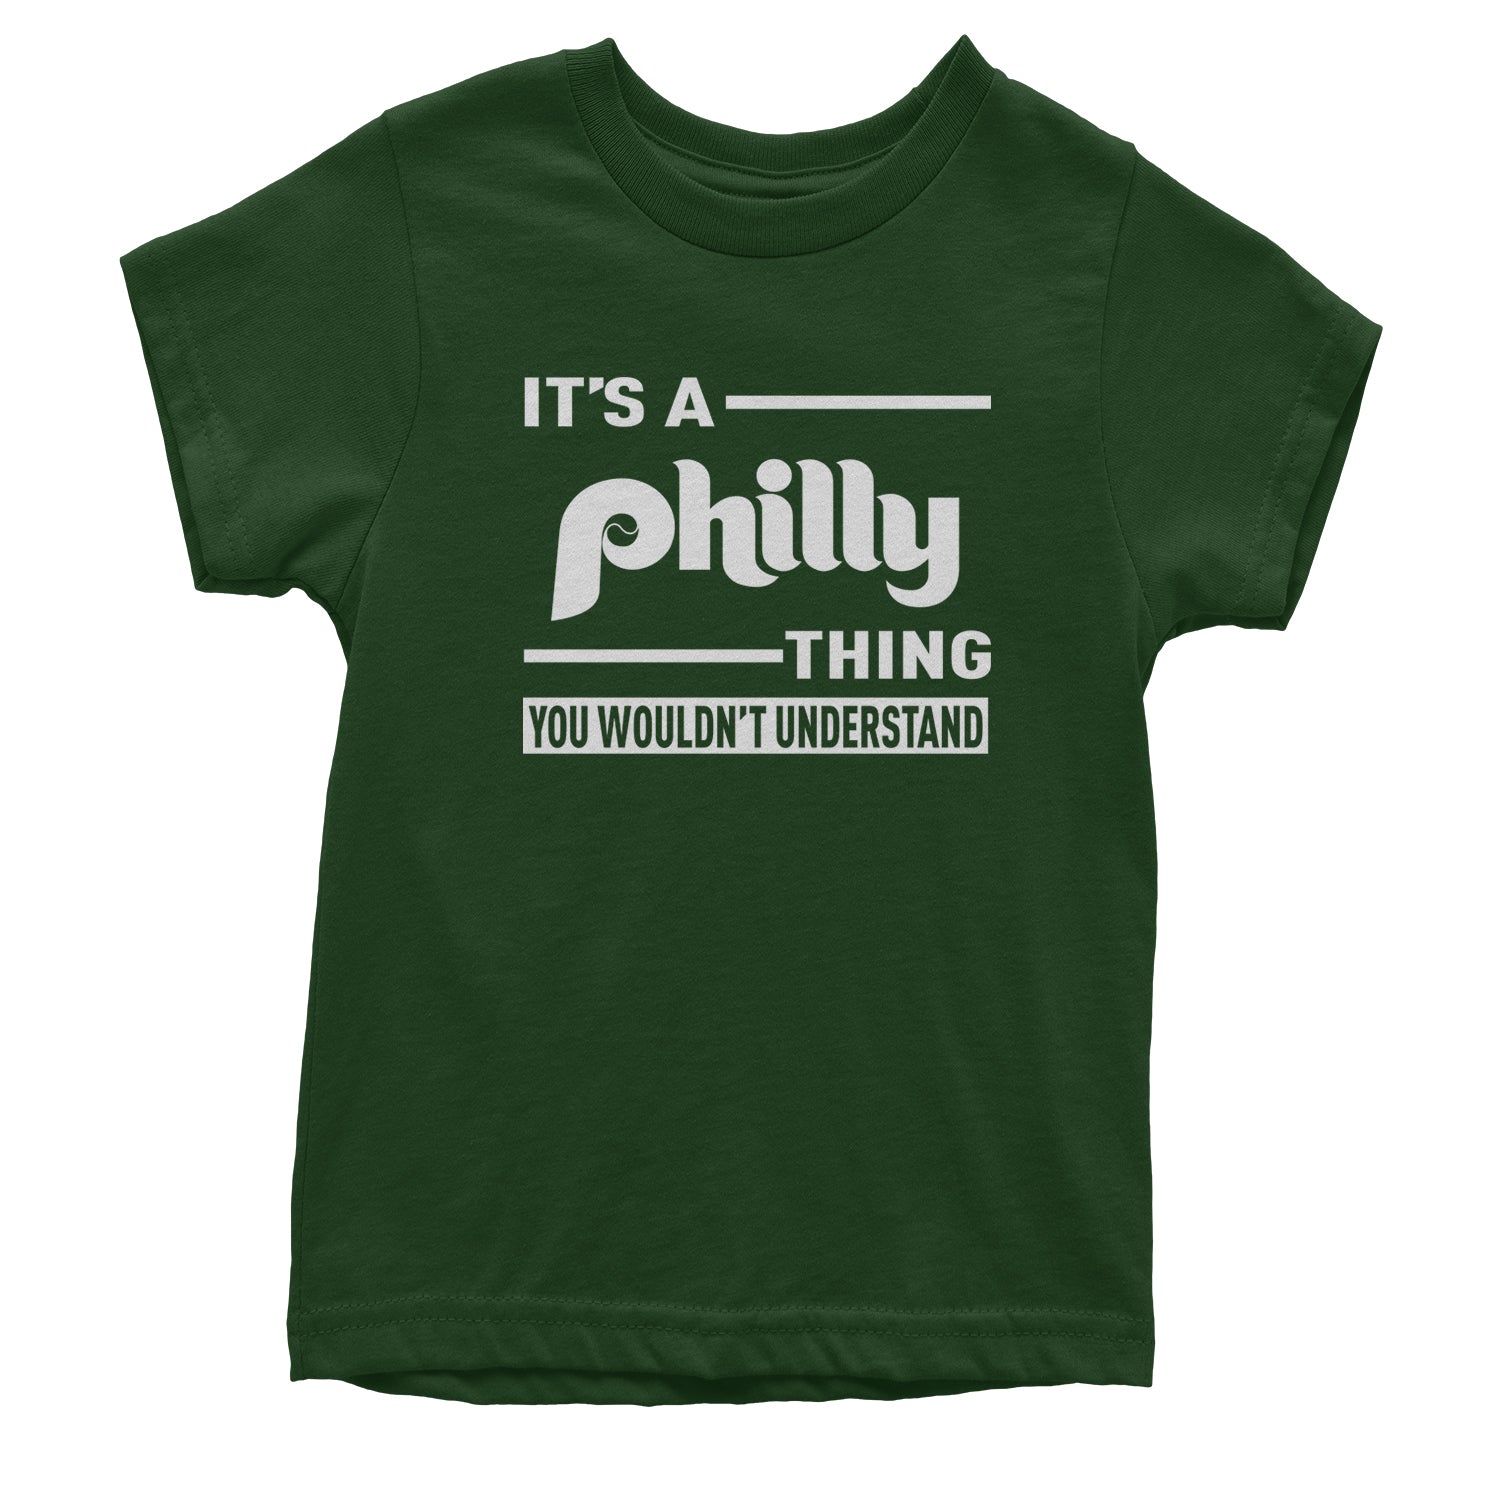 It's A Philly Thing, You Wouldn't Understand Youth T-shirt baseball, filly, football, jawn, morgan, Philadelphia, philli by Expression Tees